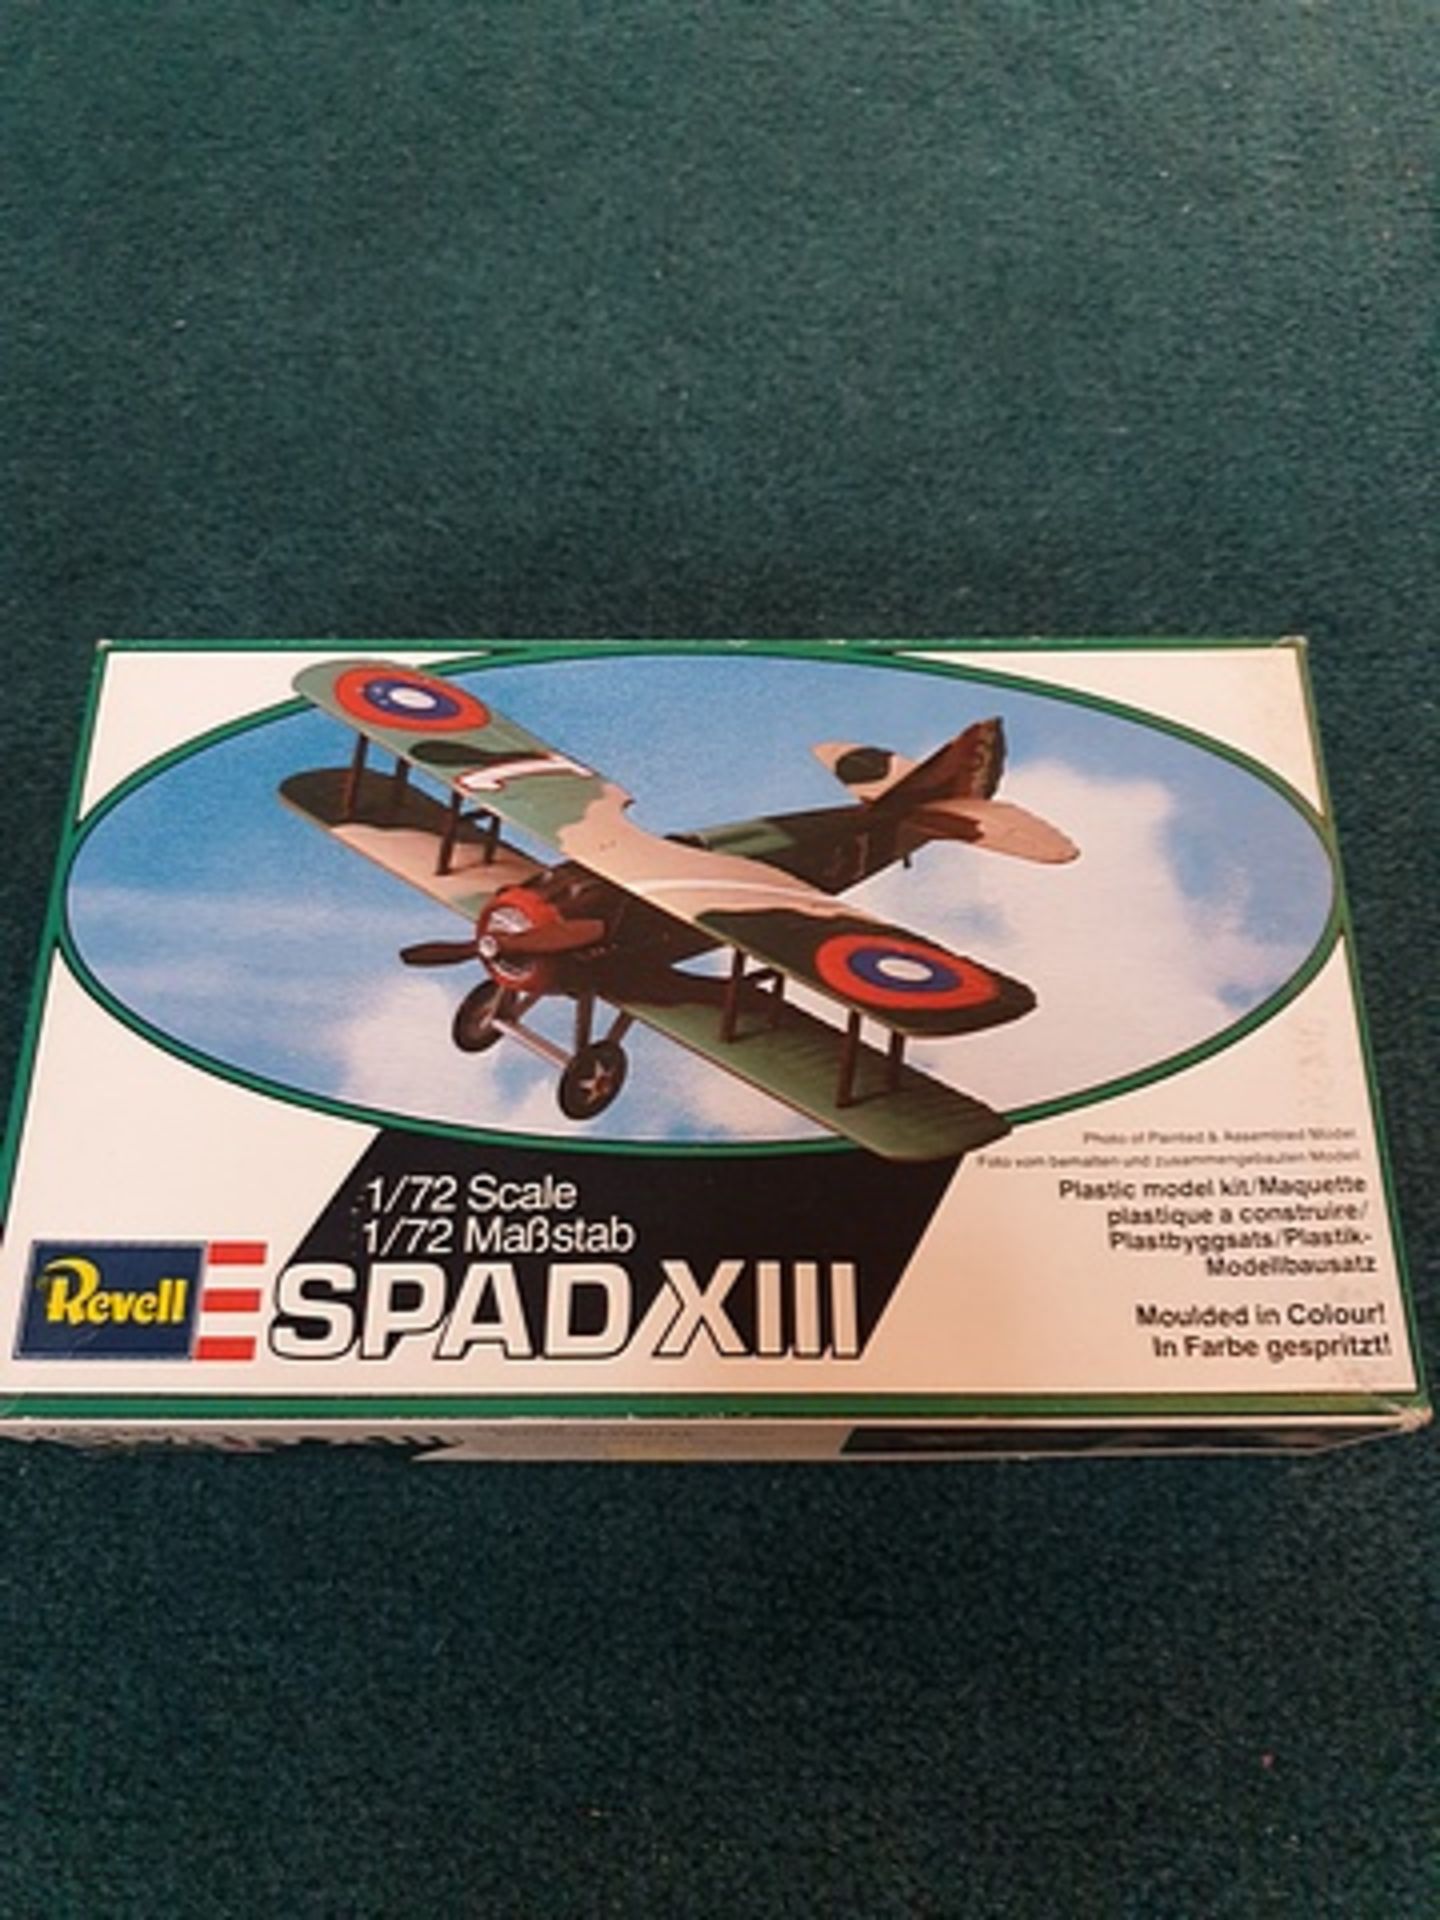 Revell scale 1/72 model 4109 Spad XIII model airplane kit released 1980 complete in box